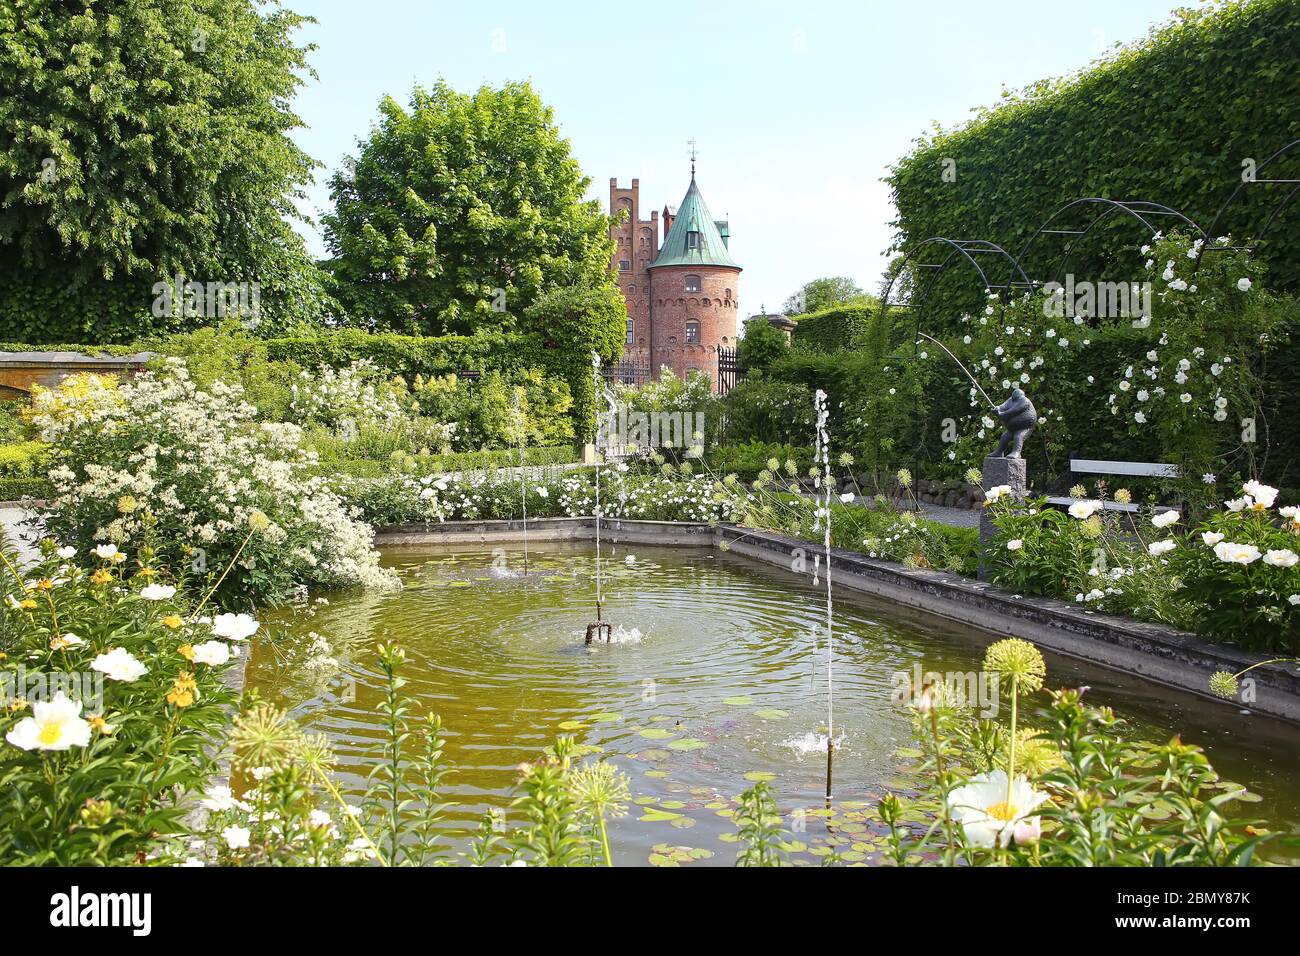 Traditional formal public garden, in bloom in the summer with a lake & small fountains in the foreground, located near Kvaerndrup, in the south of the Stock Photo